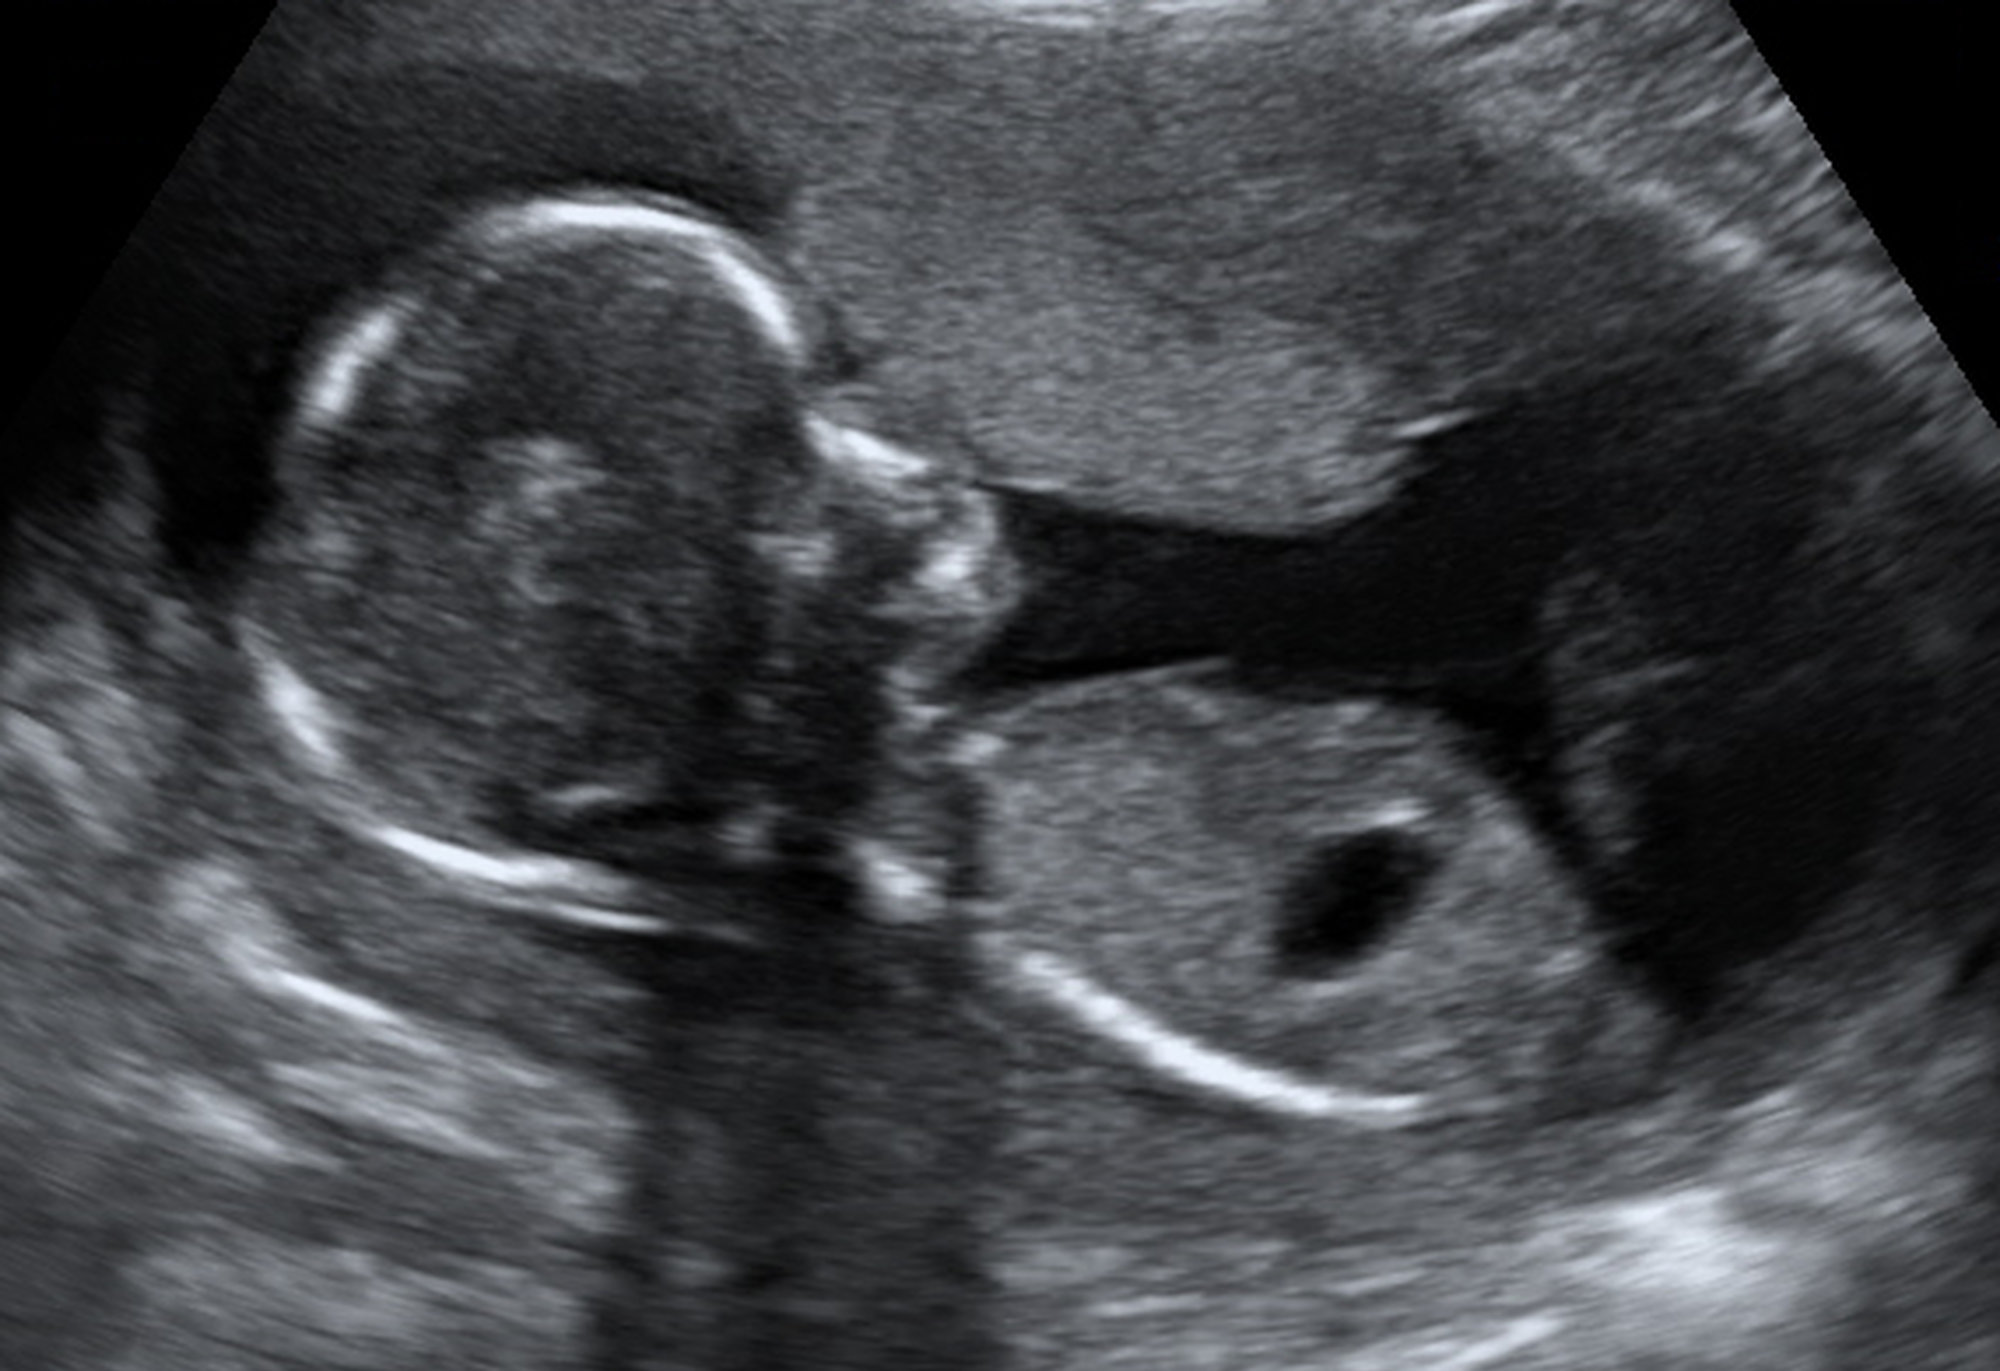 An ultrasound image showing our baby.